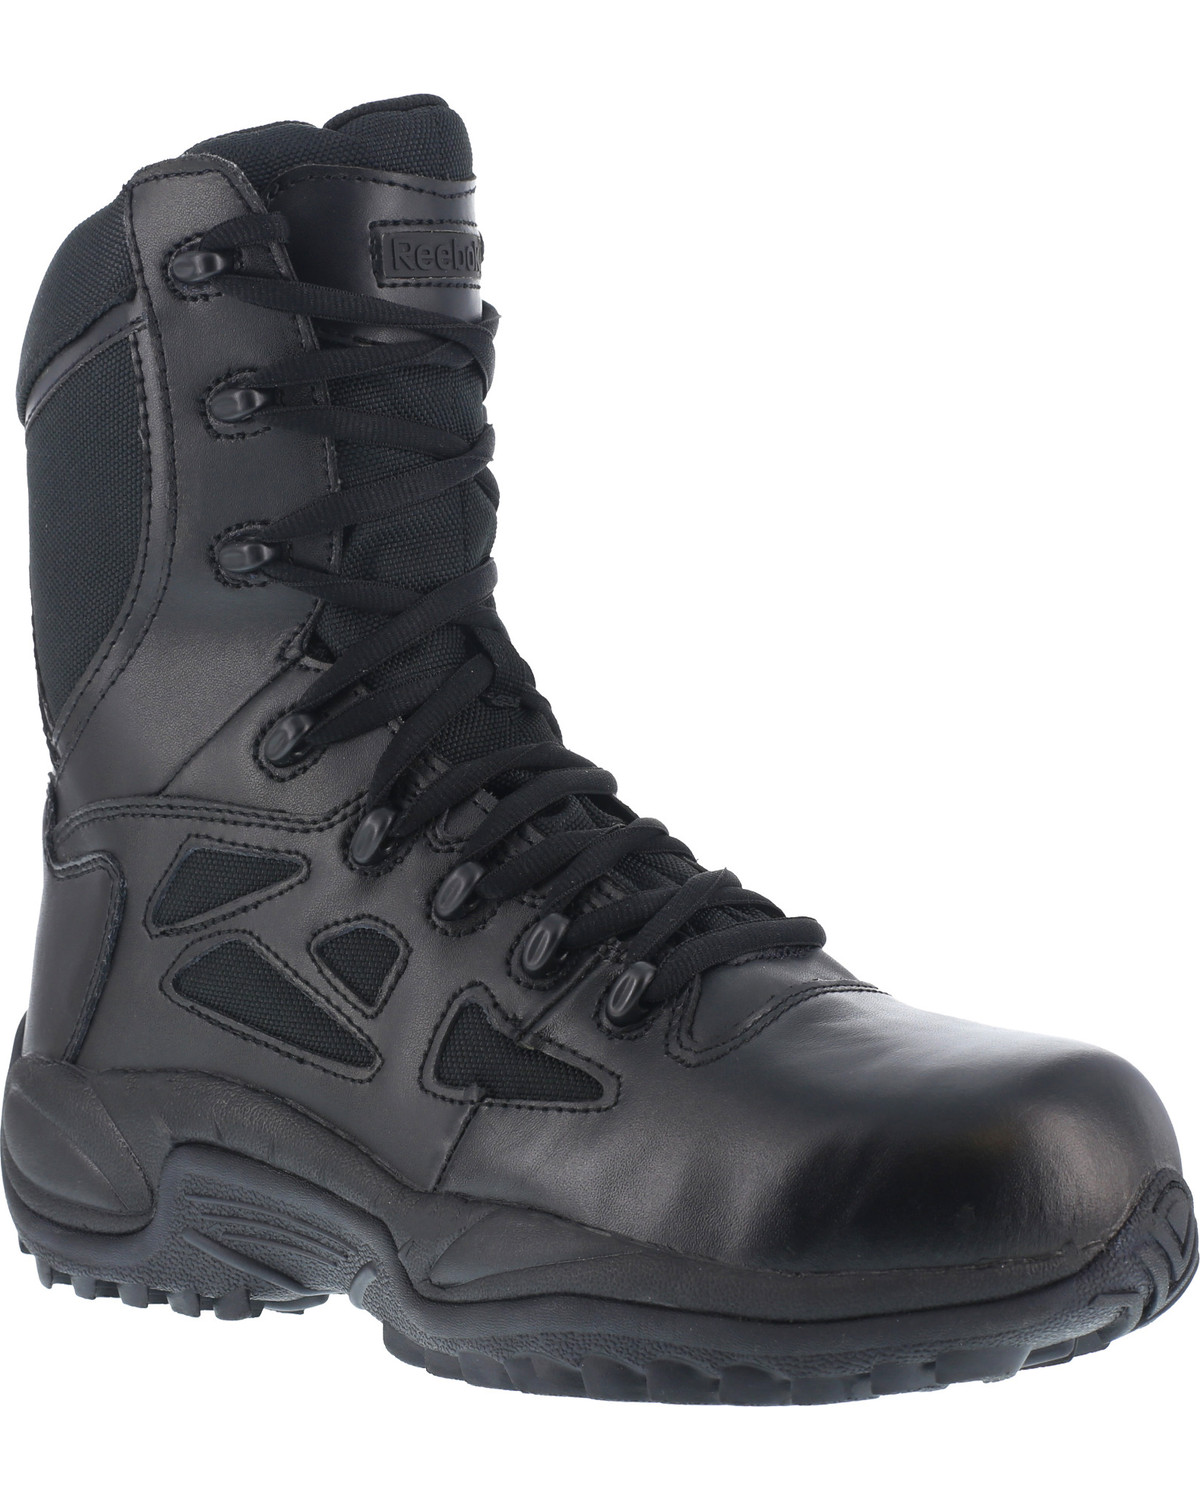 Reebok Men's Stealth 8" Lace-Up Side-Zip Work Boots